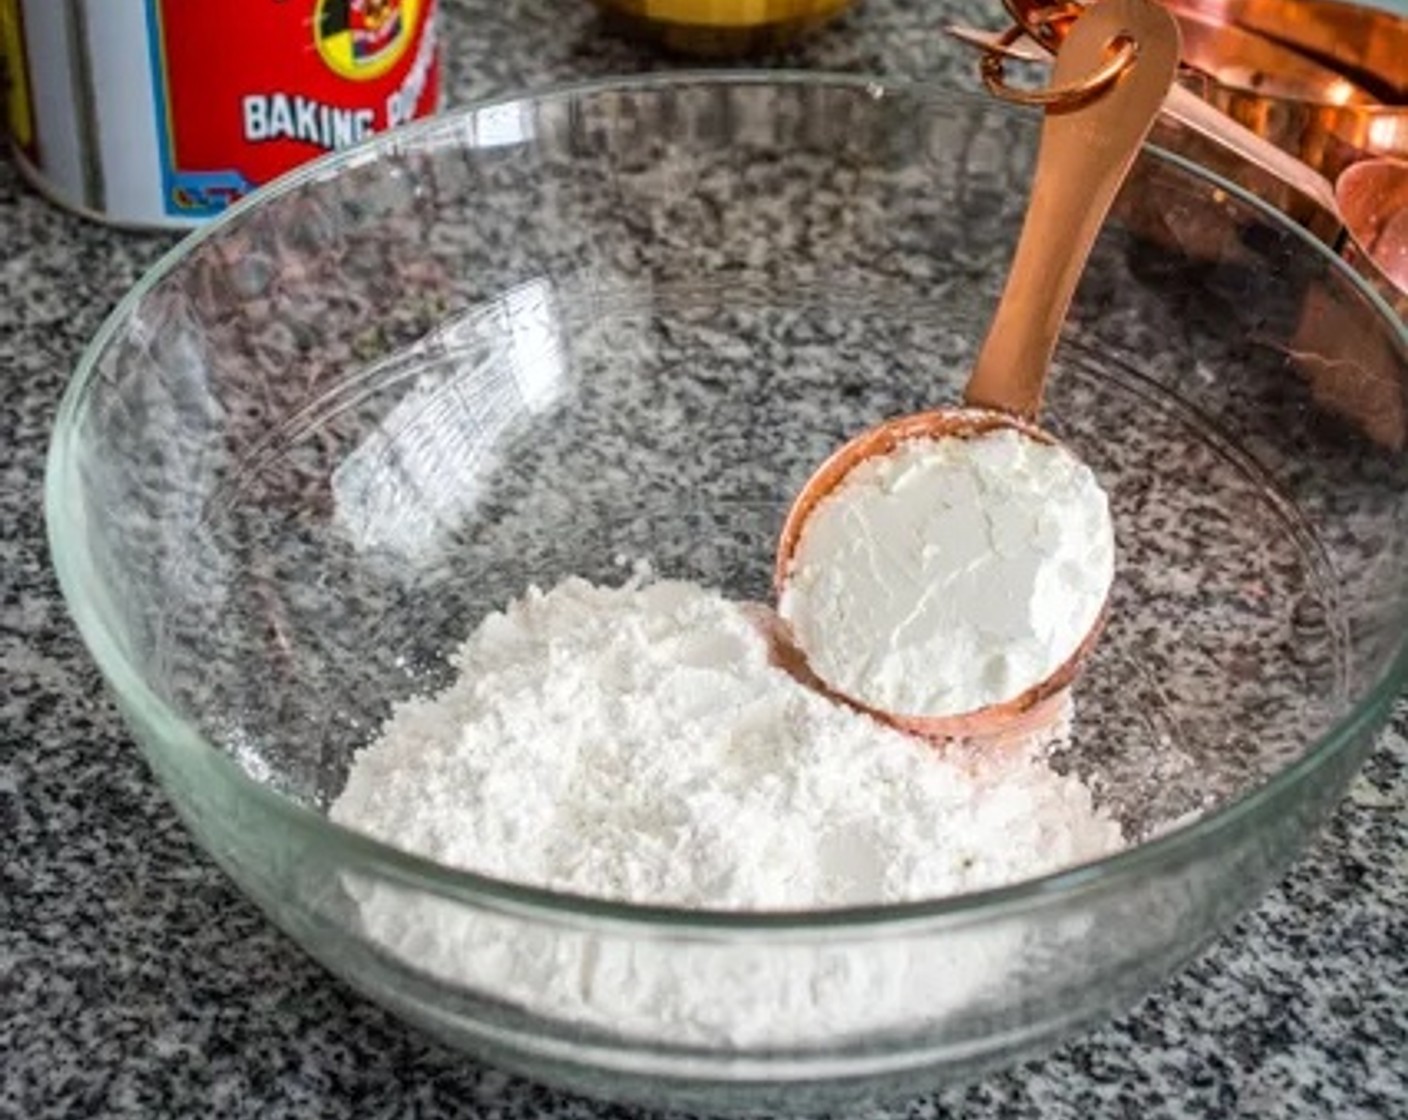 step 1 In a large bowl combine Rice Flour (1/2 cup), Corn Starch (1/4 cup), Baking Powder (1 tsp), Granulated Sugar (1 tsp), and Salt (1/2 tsp).